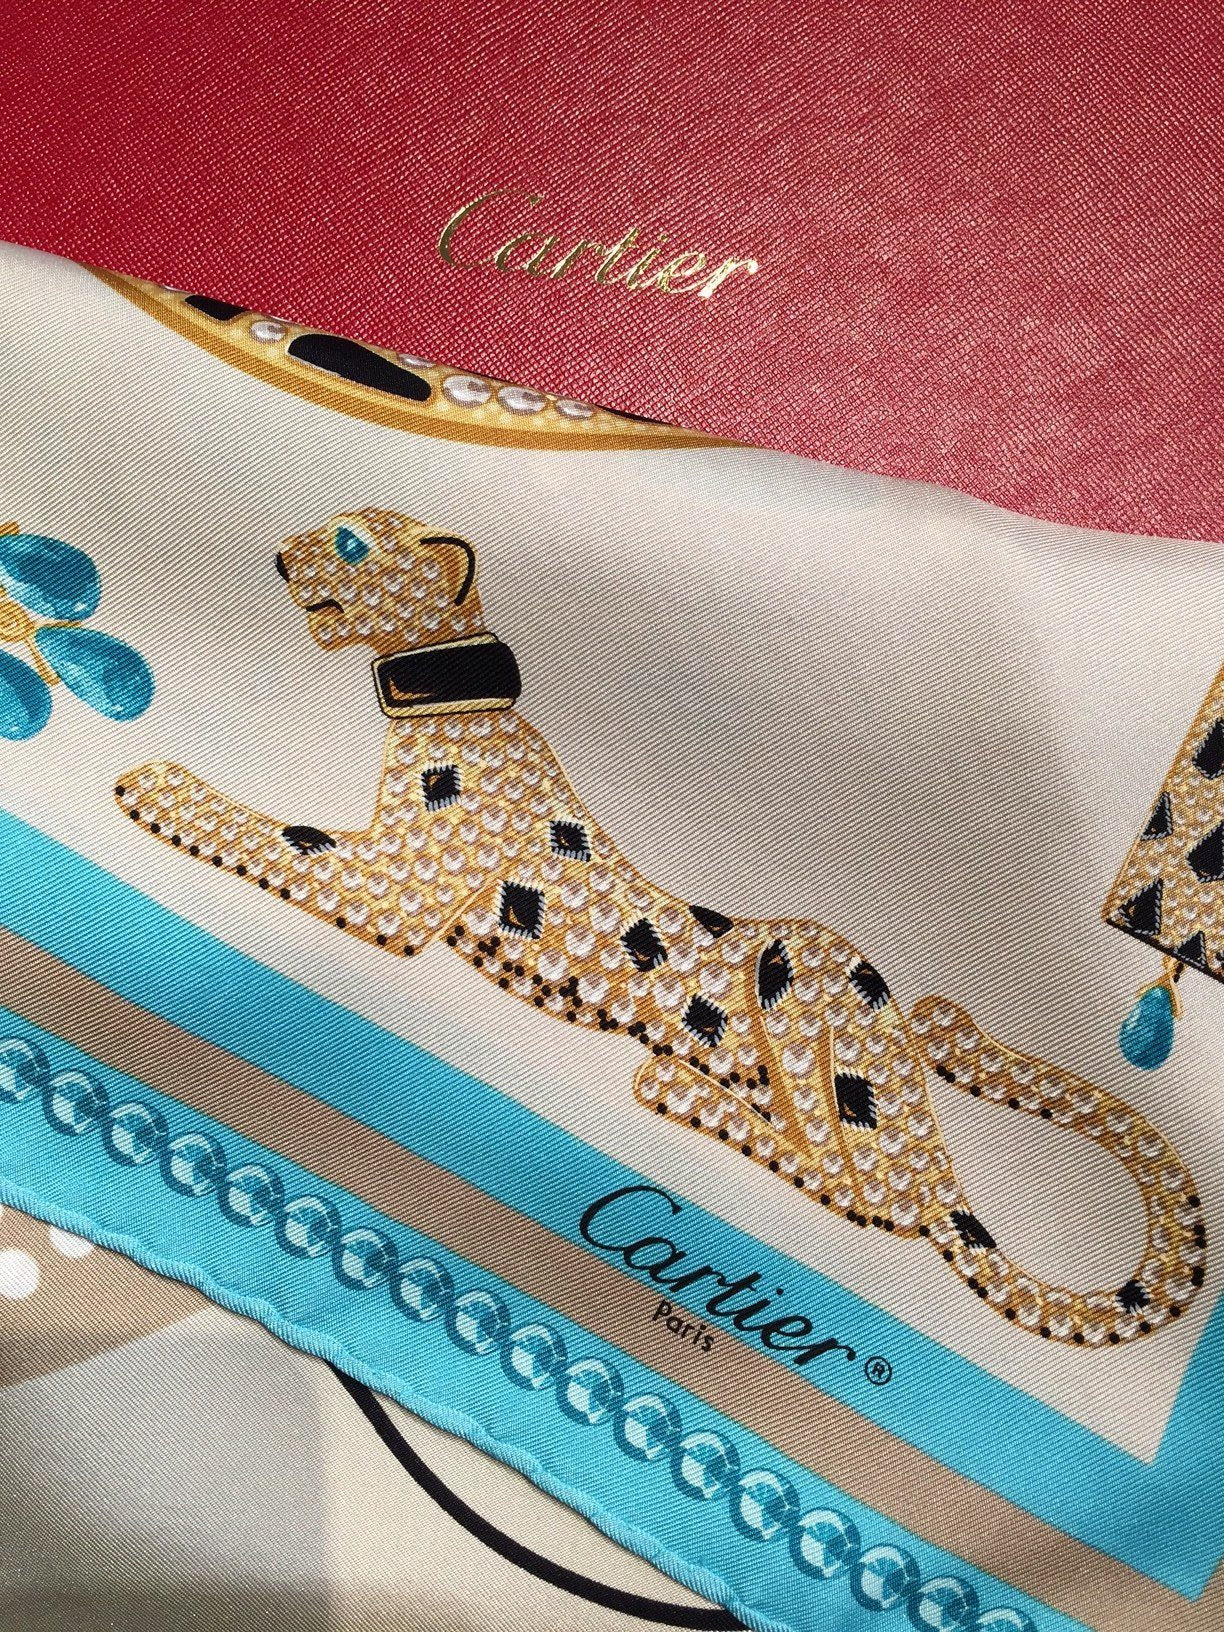 Gold Vintage Cartier Panther Diamond Jewelry Silk Scarf Cushion Pillow